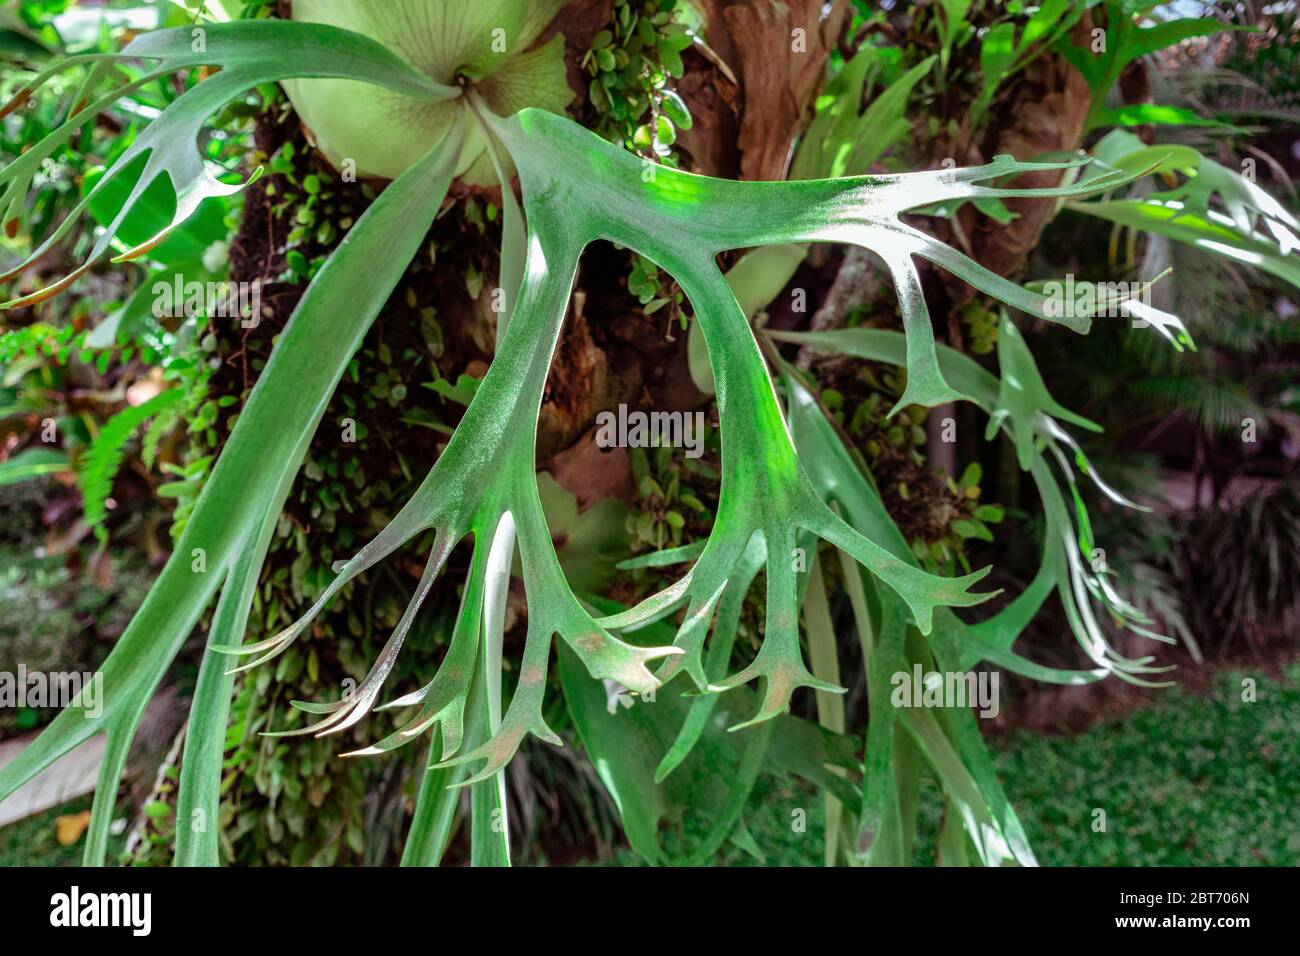 Close up of a staghorn fern, Platycerium, tropical Elkhorn grew on the branch of tree in tropical rainforest, parasite plant on a tree in Bali, Indone Stock Photo